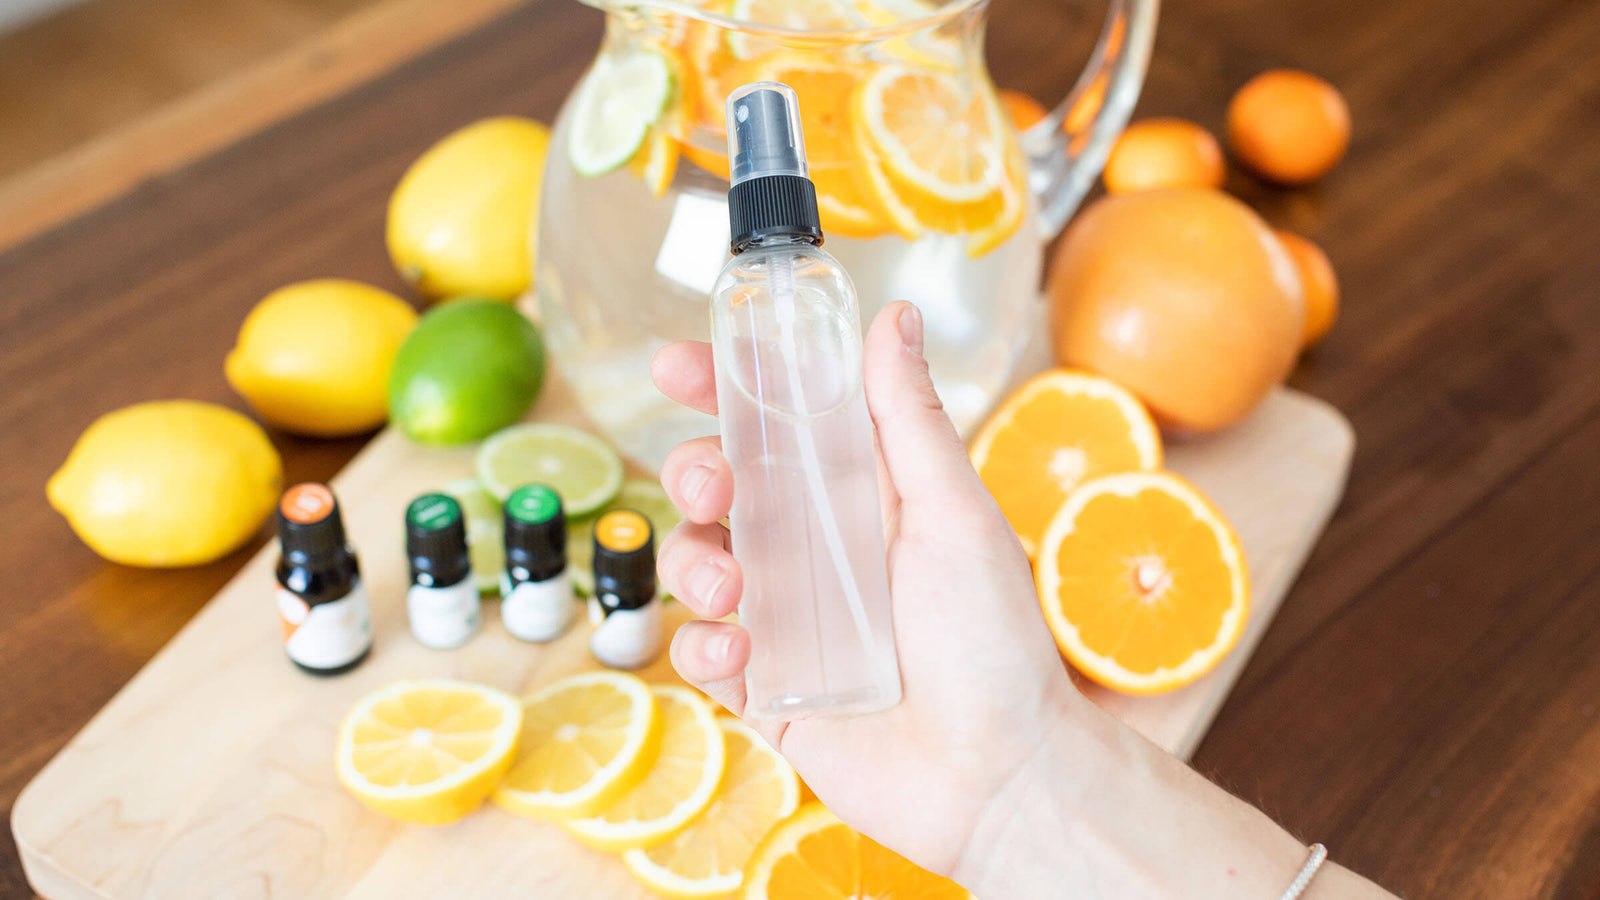 The 10 best essential oils for natural cleaning